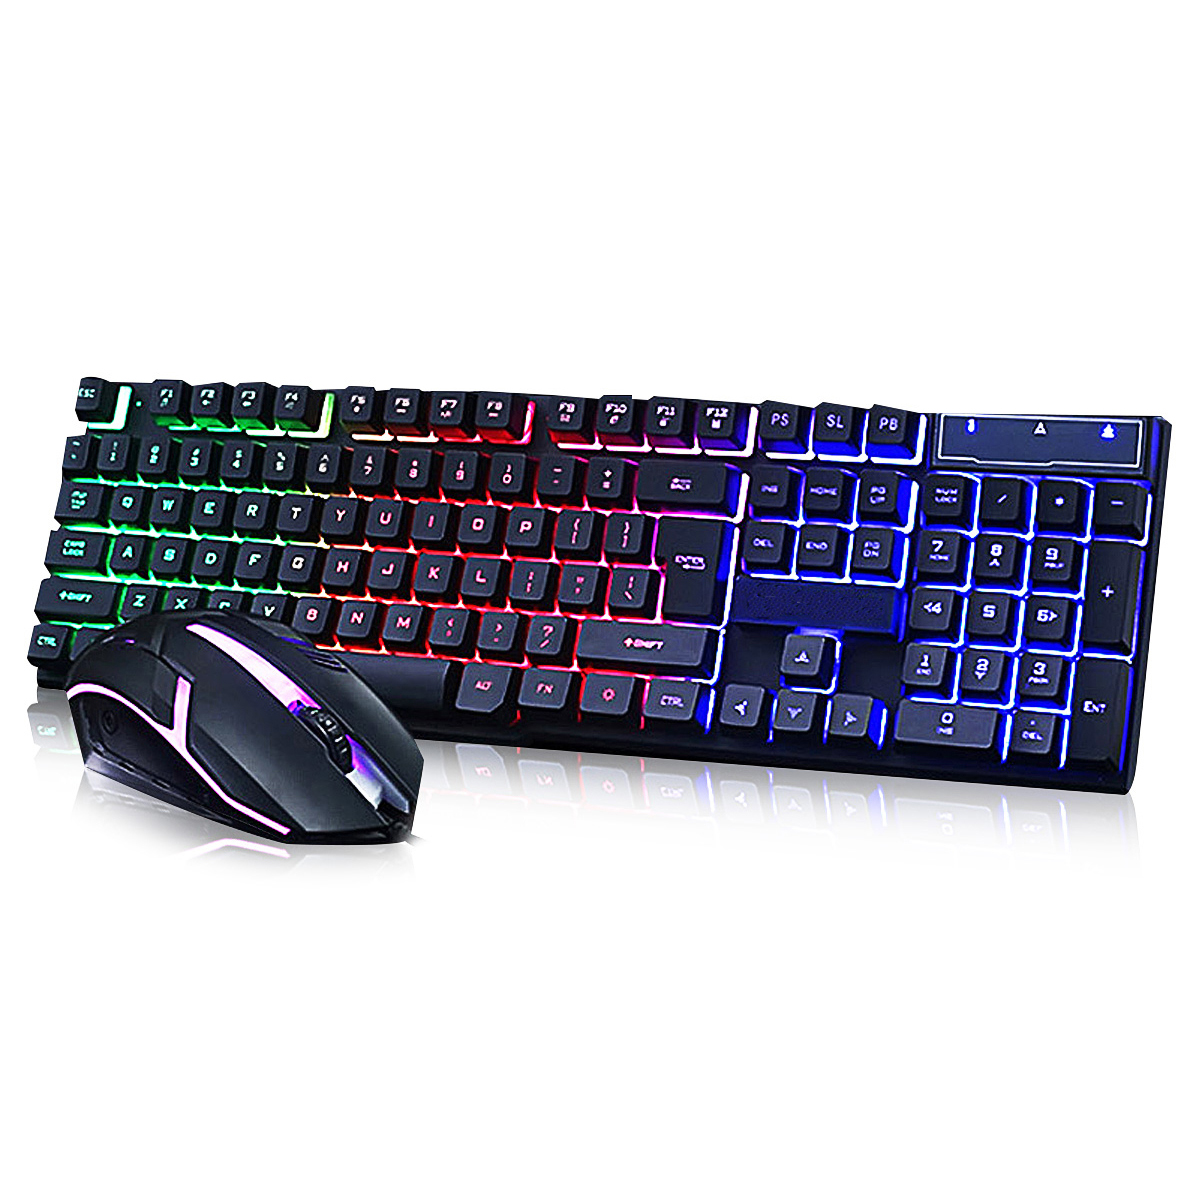 GTX300 104 Keys RGB Backlight Superthin Gaming Keyboard and 2.4GHZ 1200DPI 3 buttons USB Optical Gaming Mouse 1